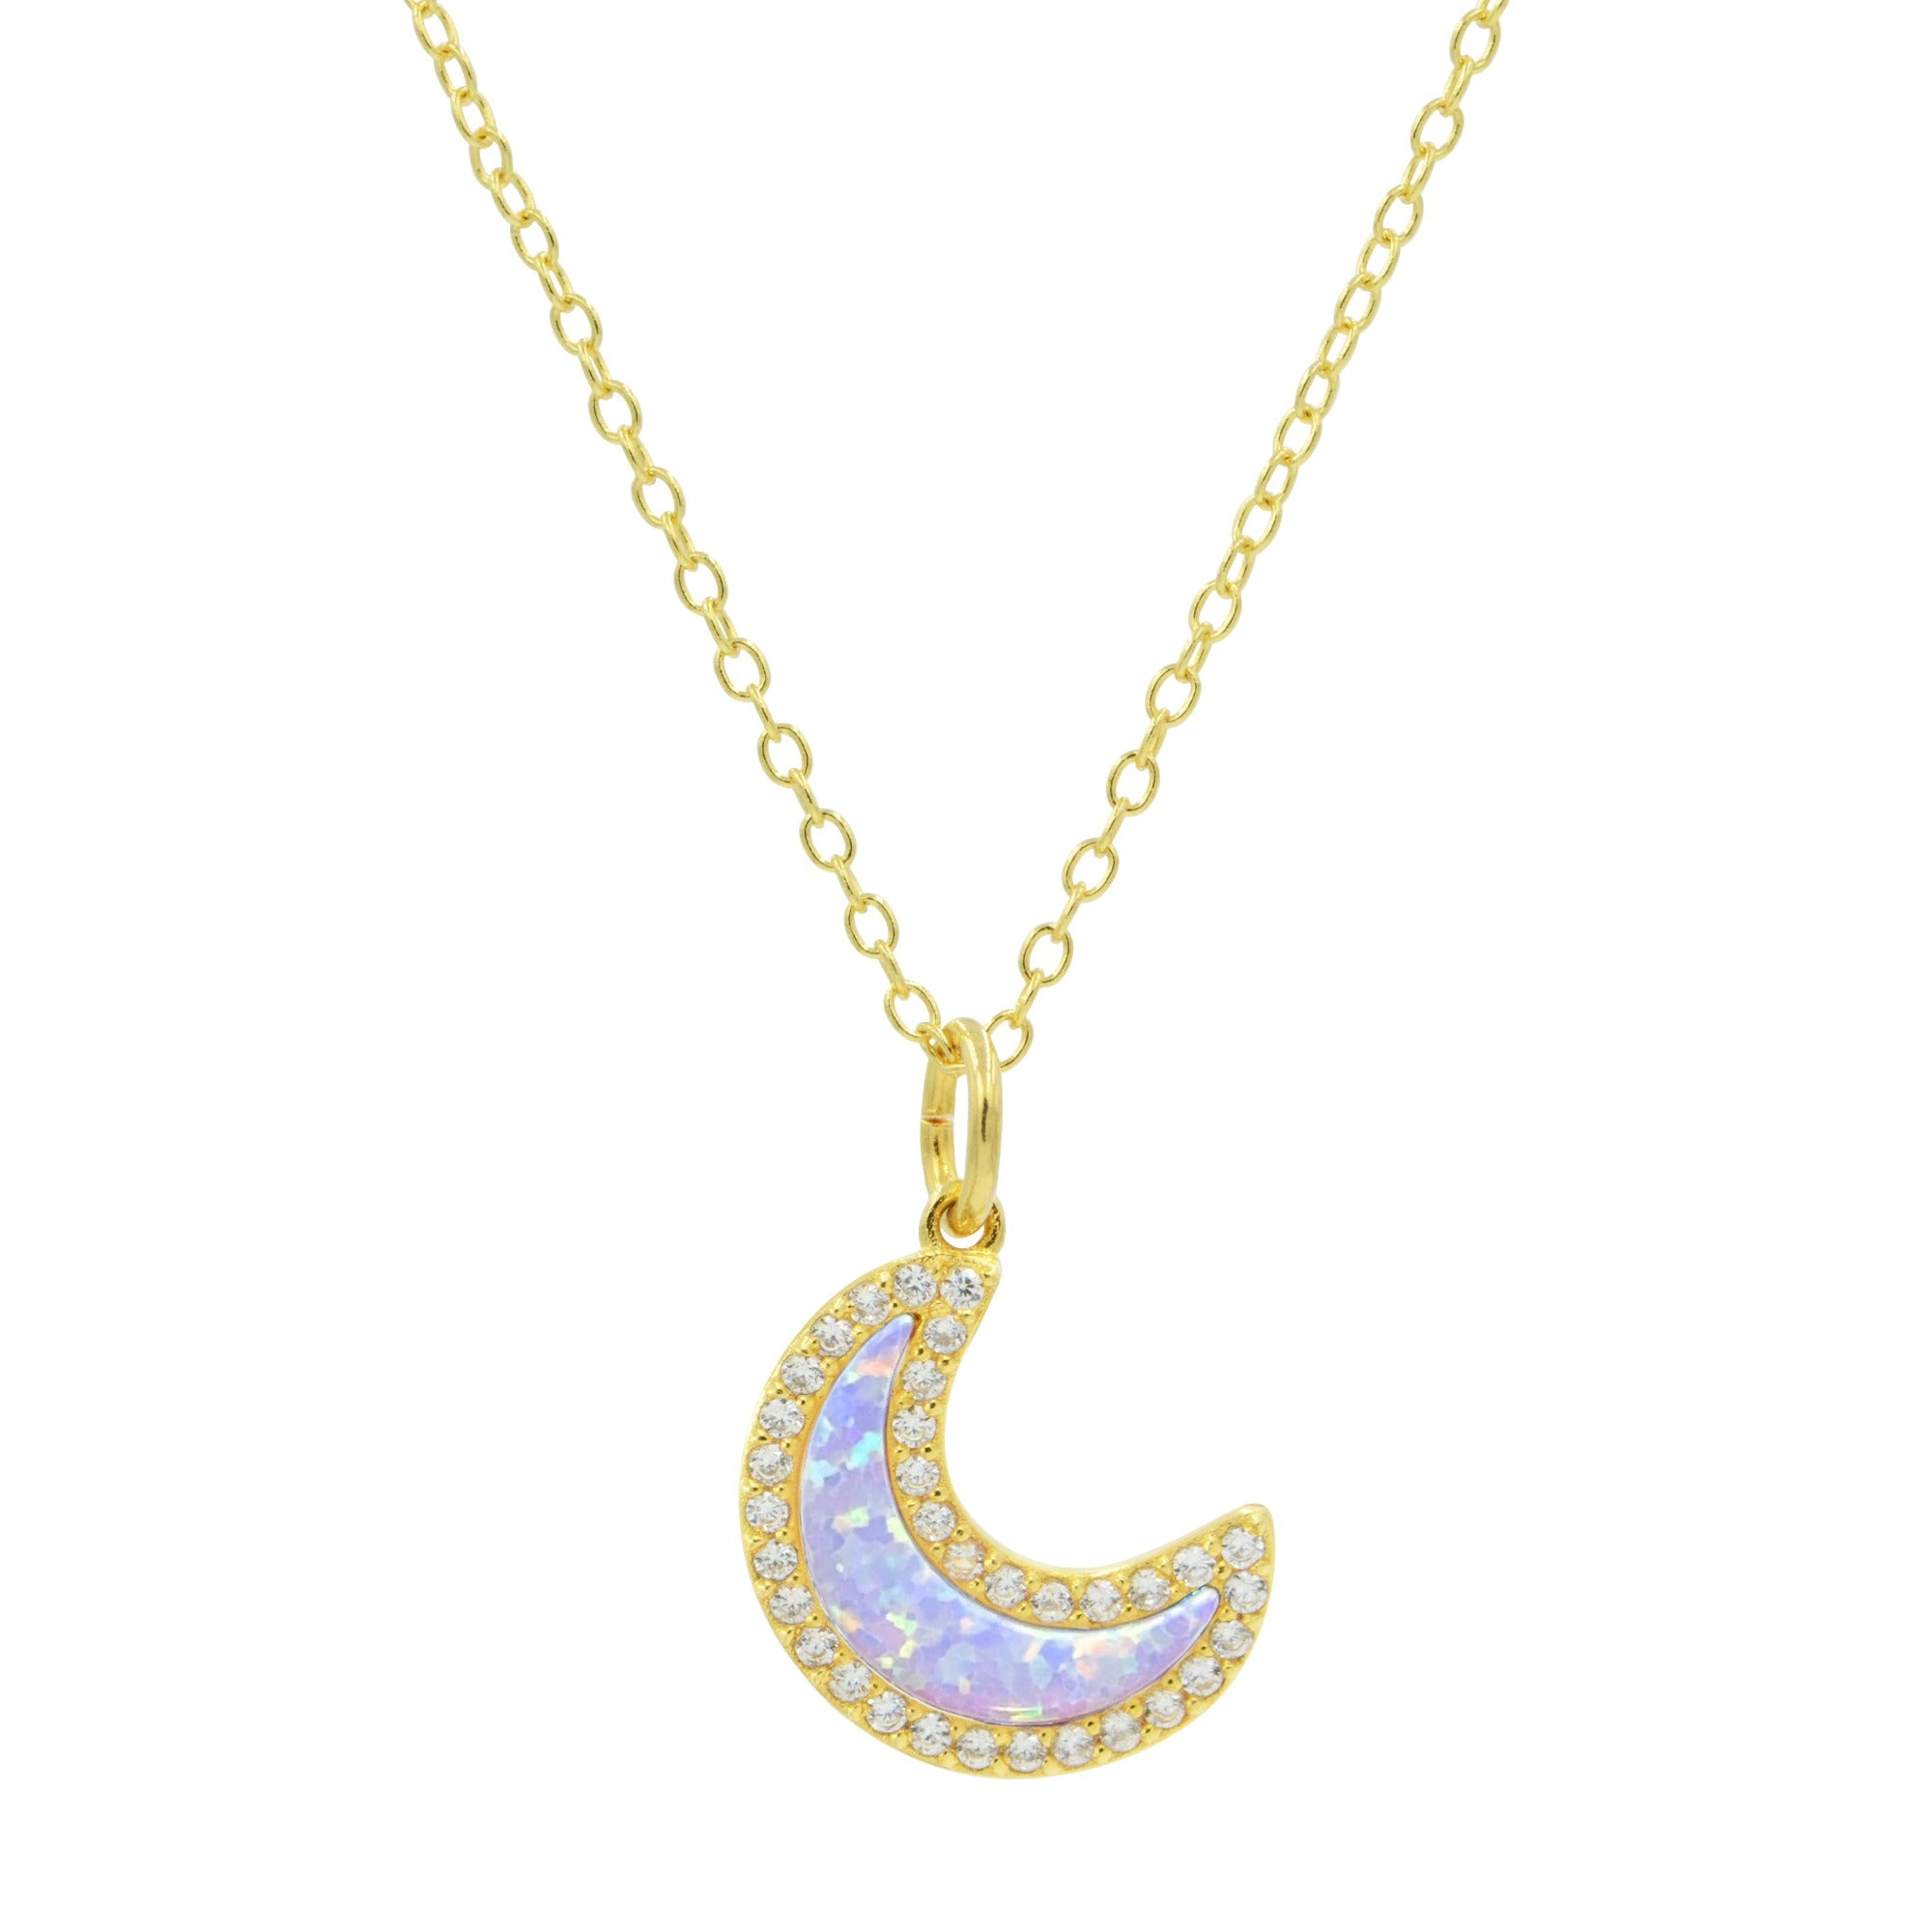 Crescent Moon Necklace with Opal and CZ – local eclectic